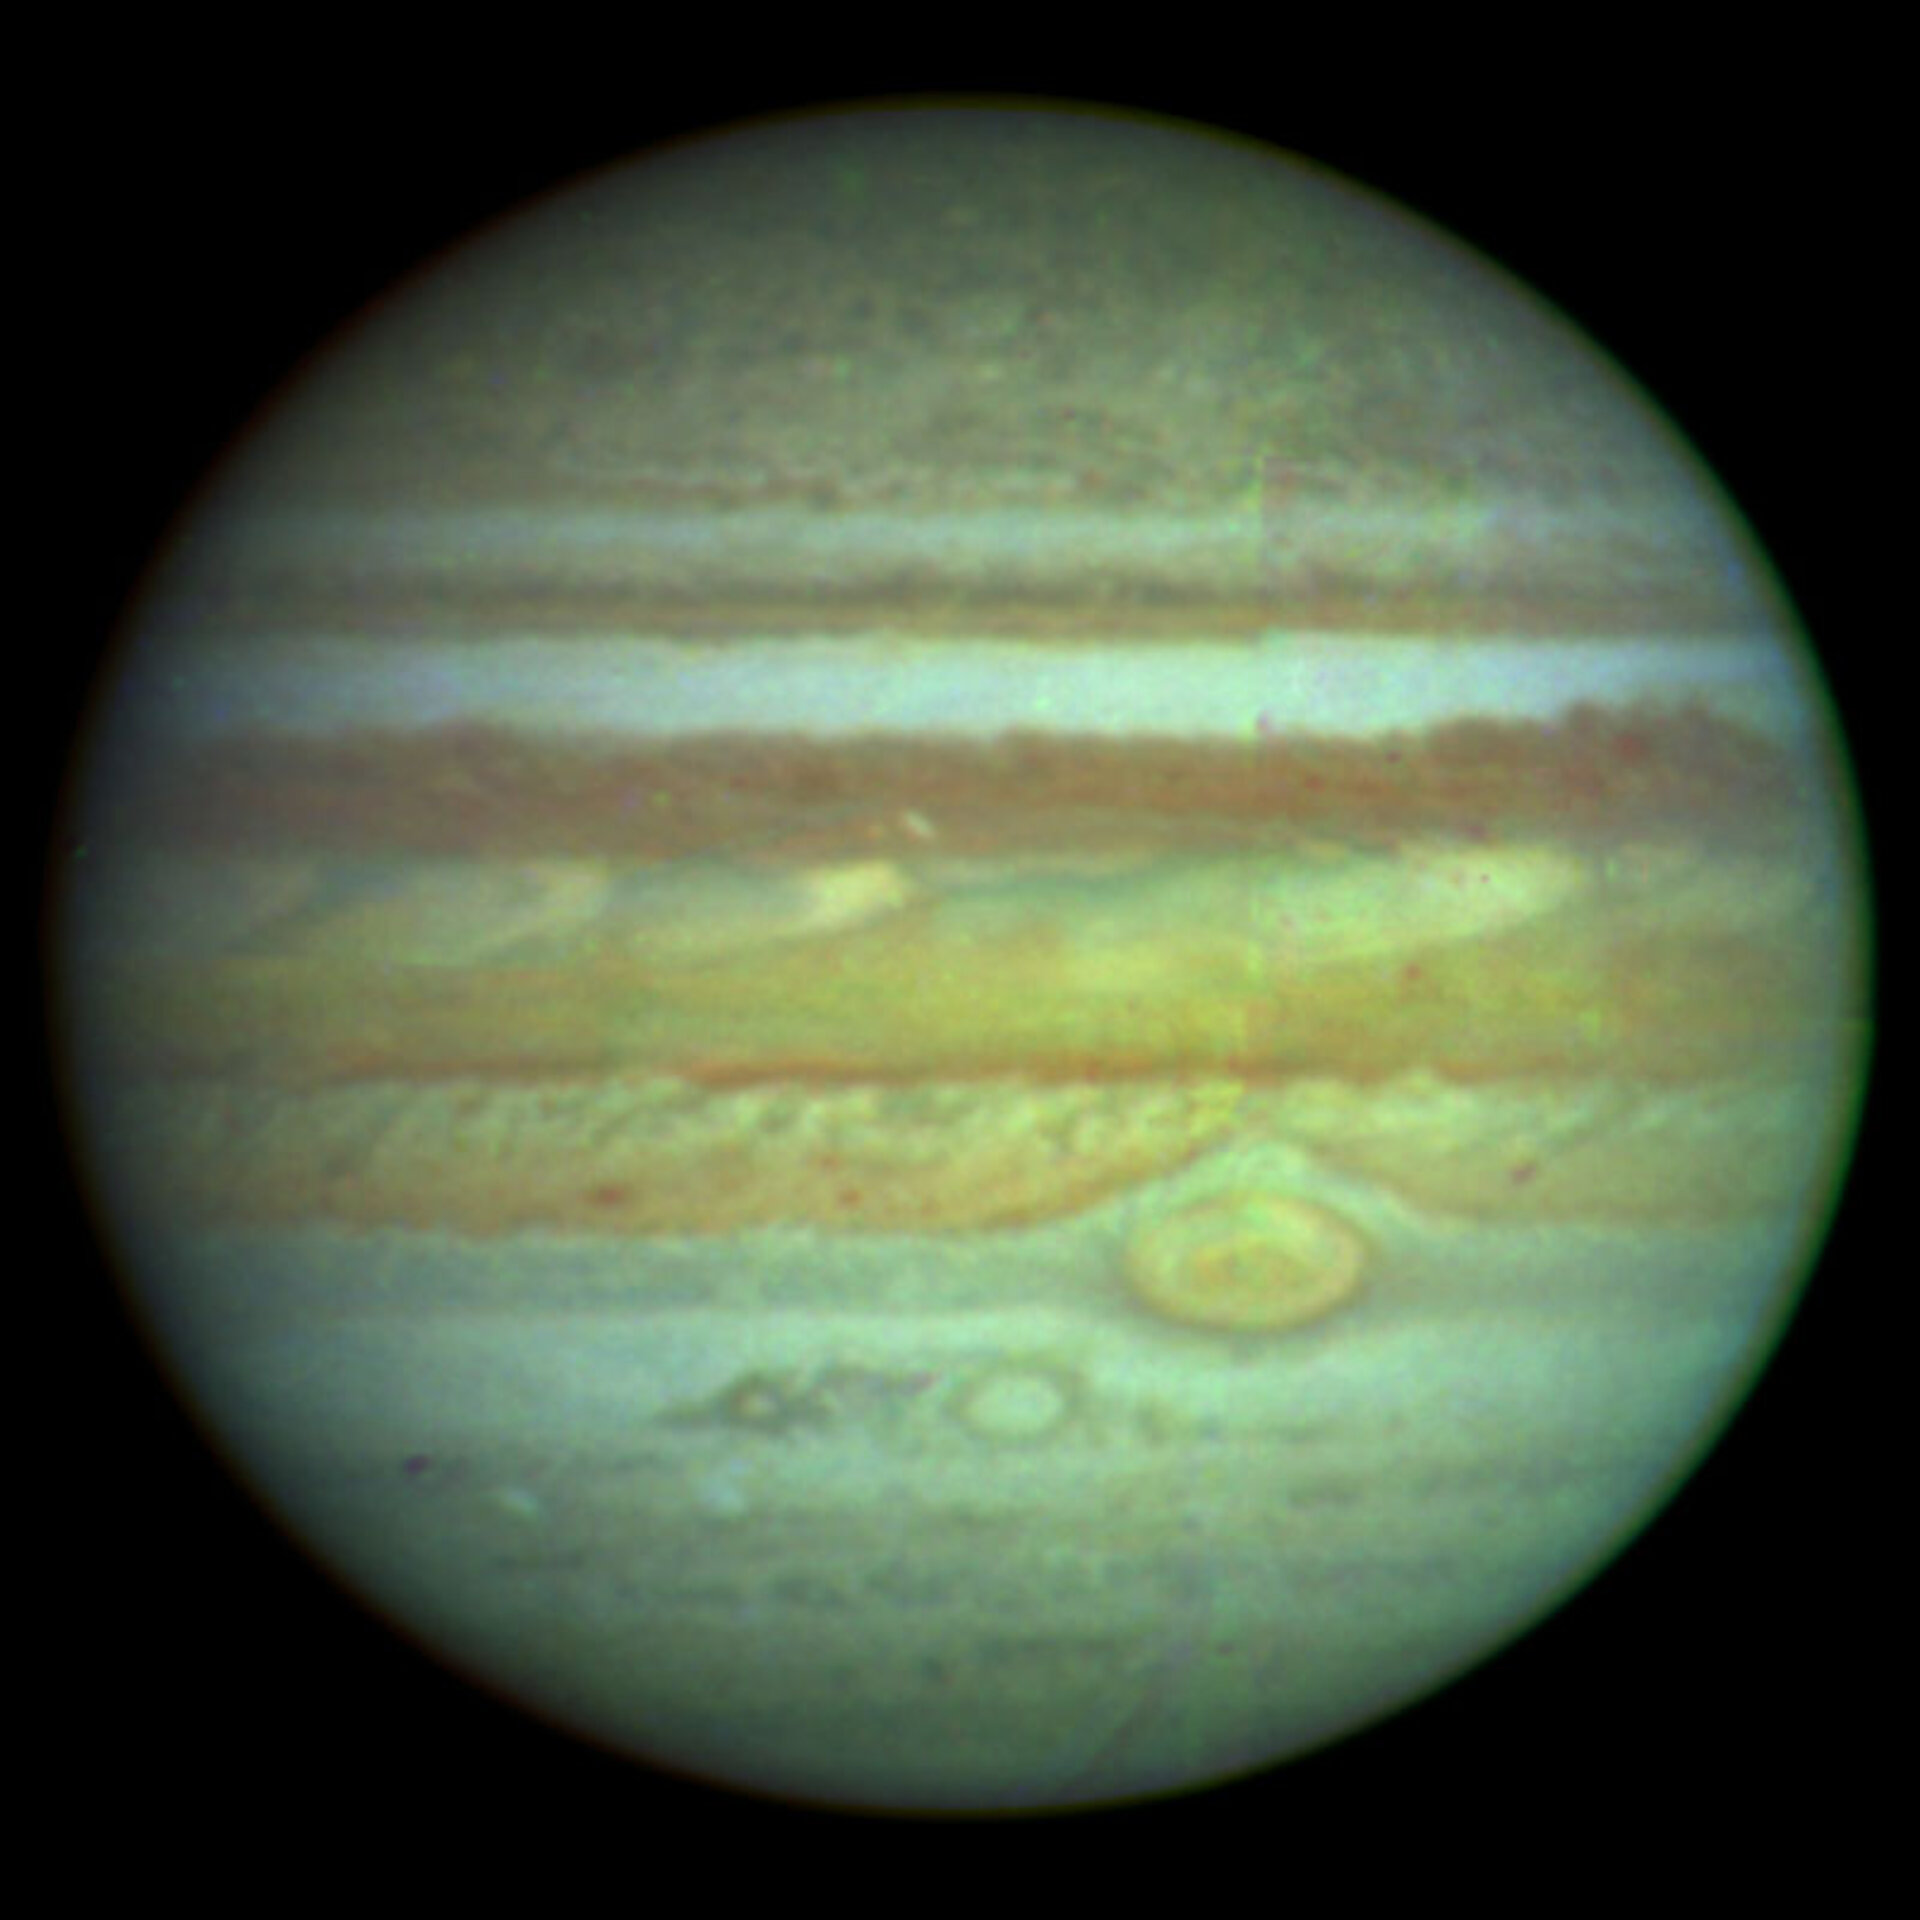 Jupiter, with Great Red Spot visible